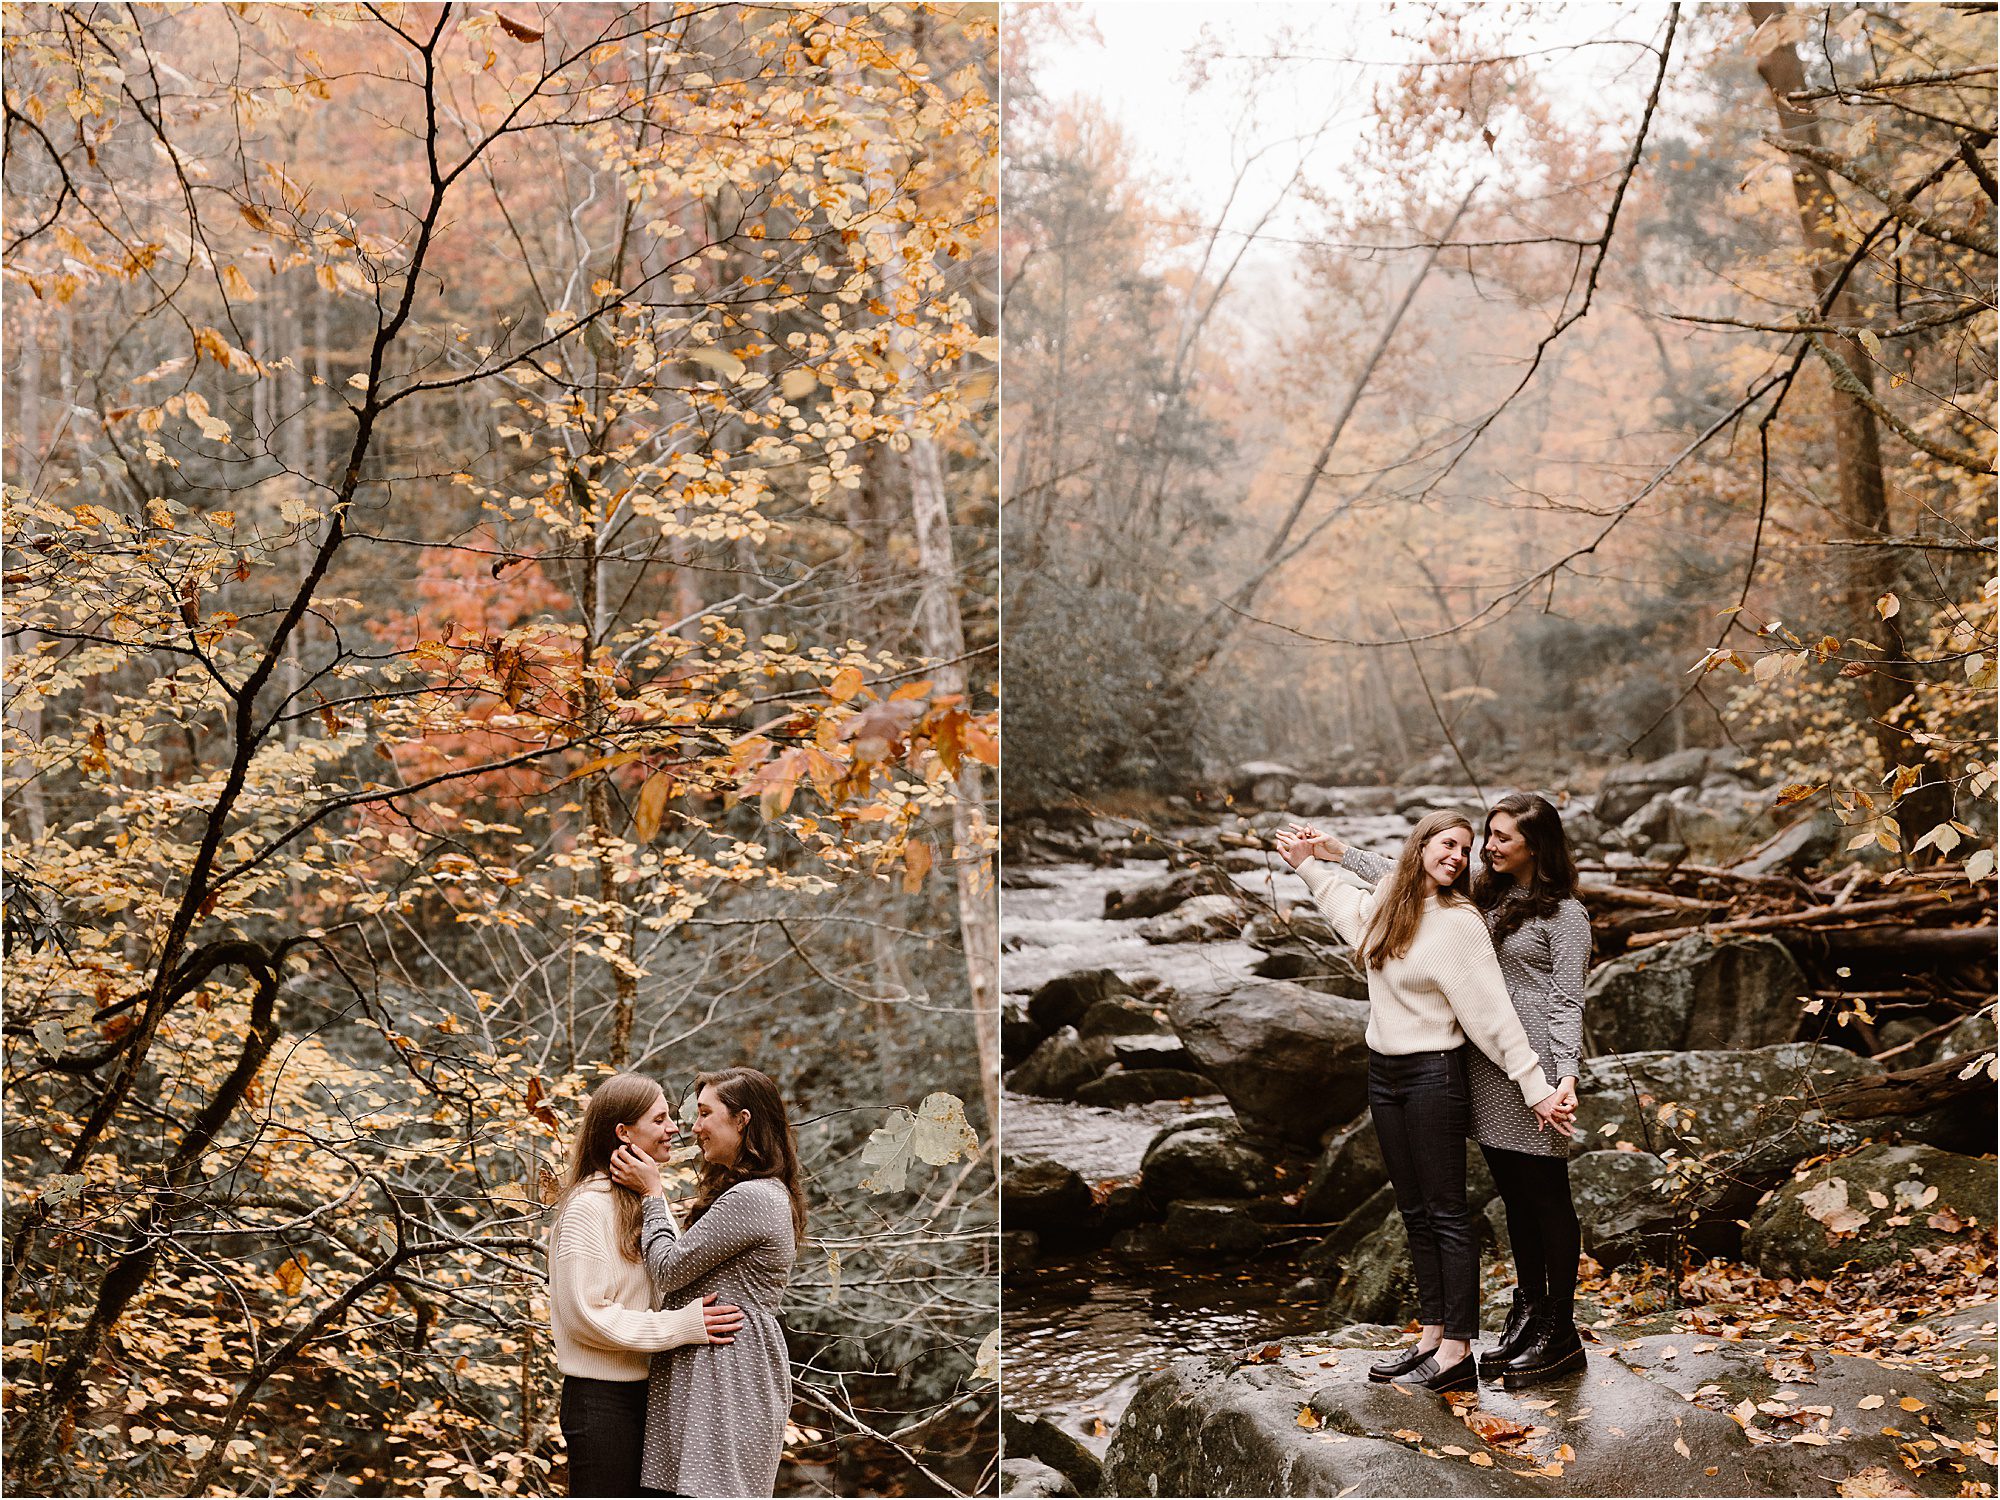 autumn engagement session in the Smoky Mountains during peak color season